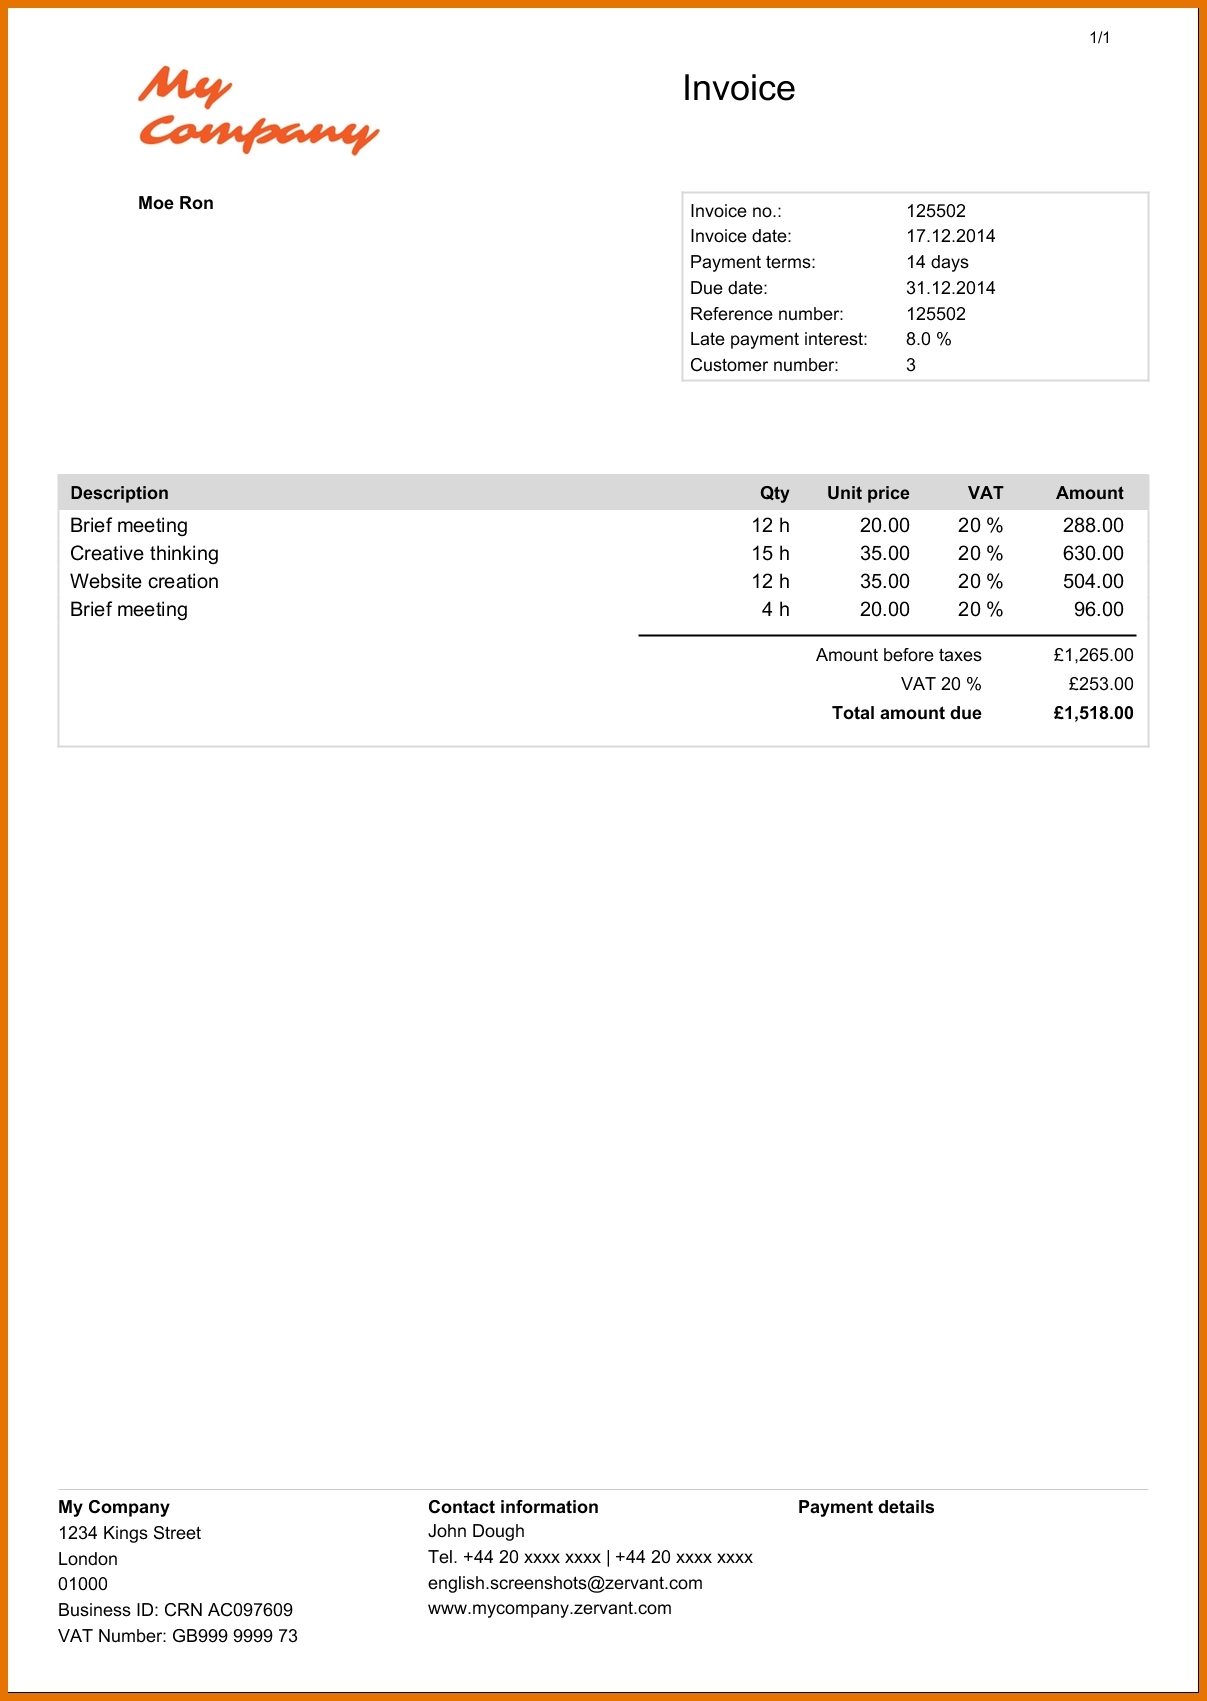 create-your-own-invoices-invoice-template-ideas